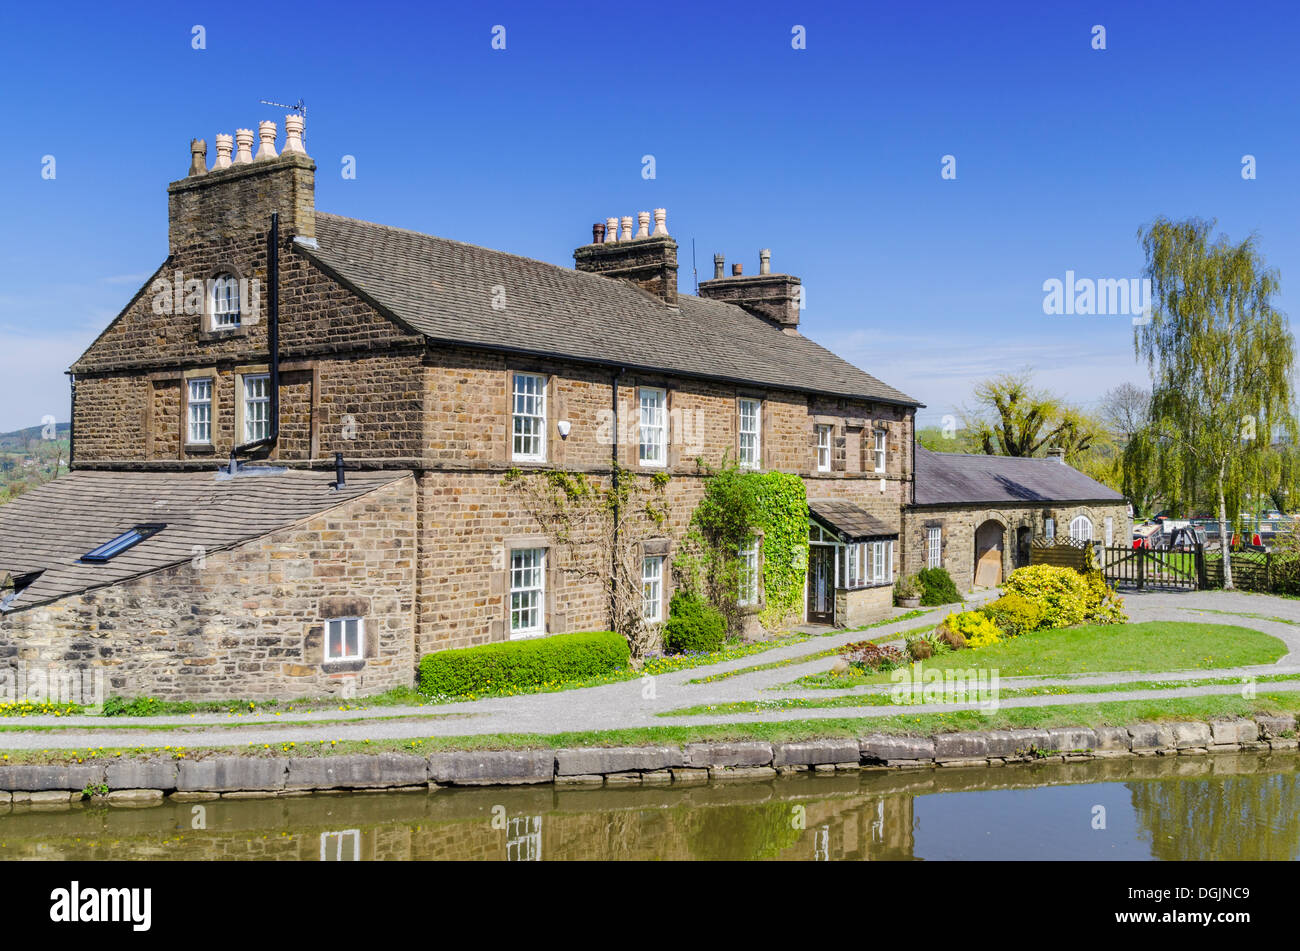 Top Lock House at the junction of the Peak Forest and Macclesfield canals, Marple, Greater Manchester, England Stock Photo